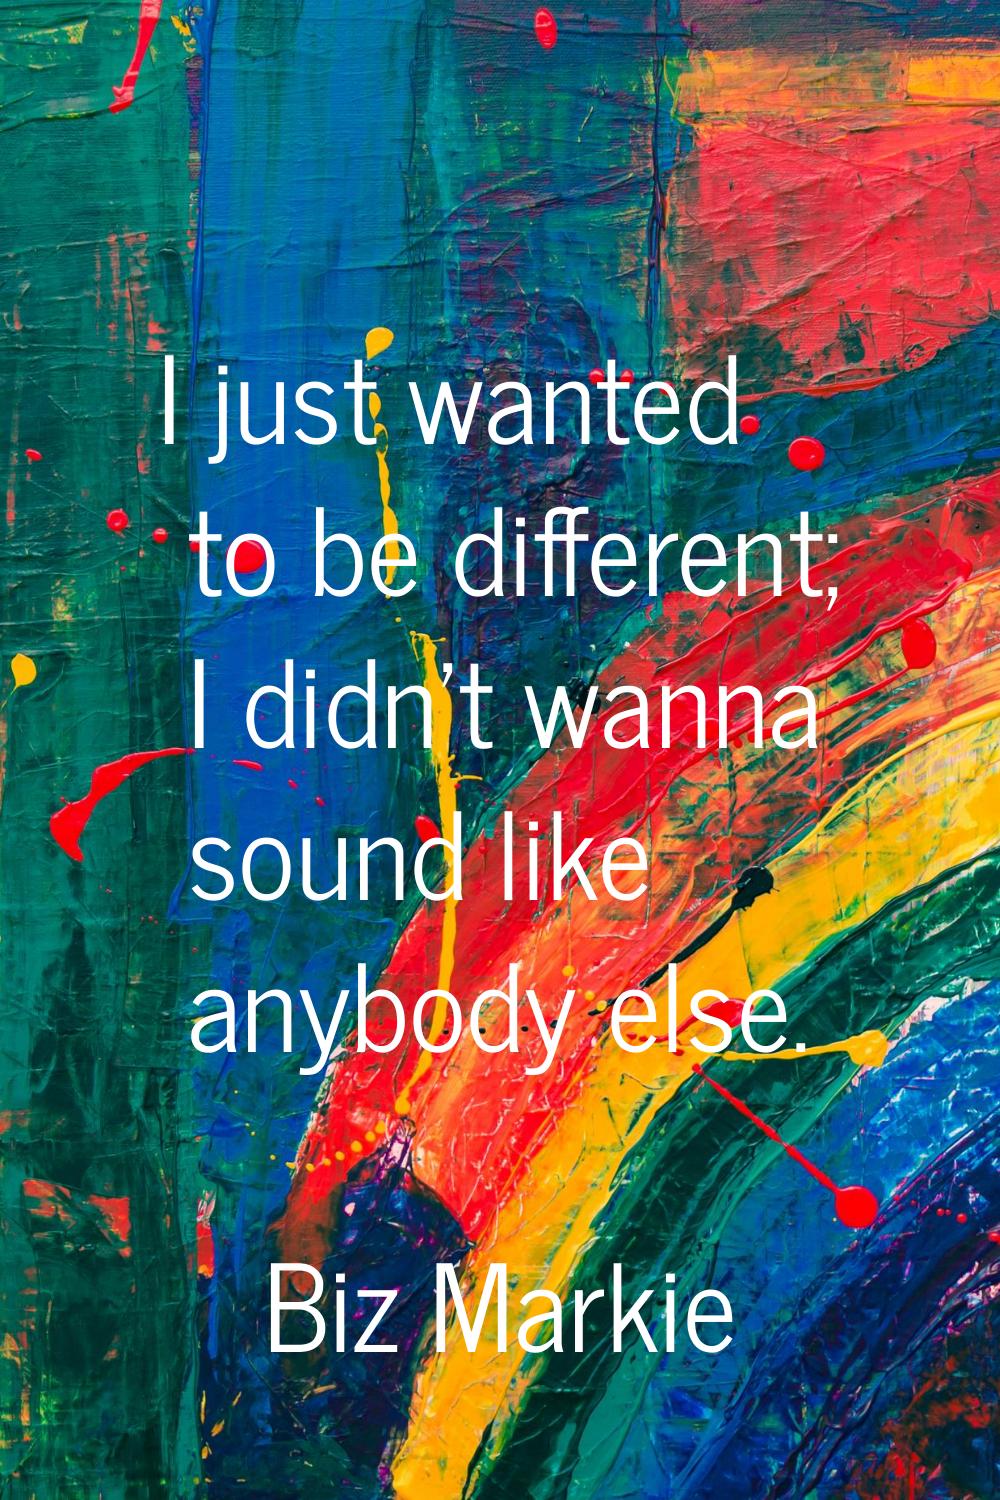 I just wanted to be different; I didn't wanna sound like anybody else.